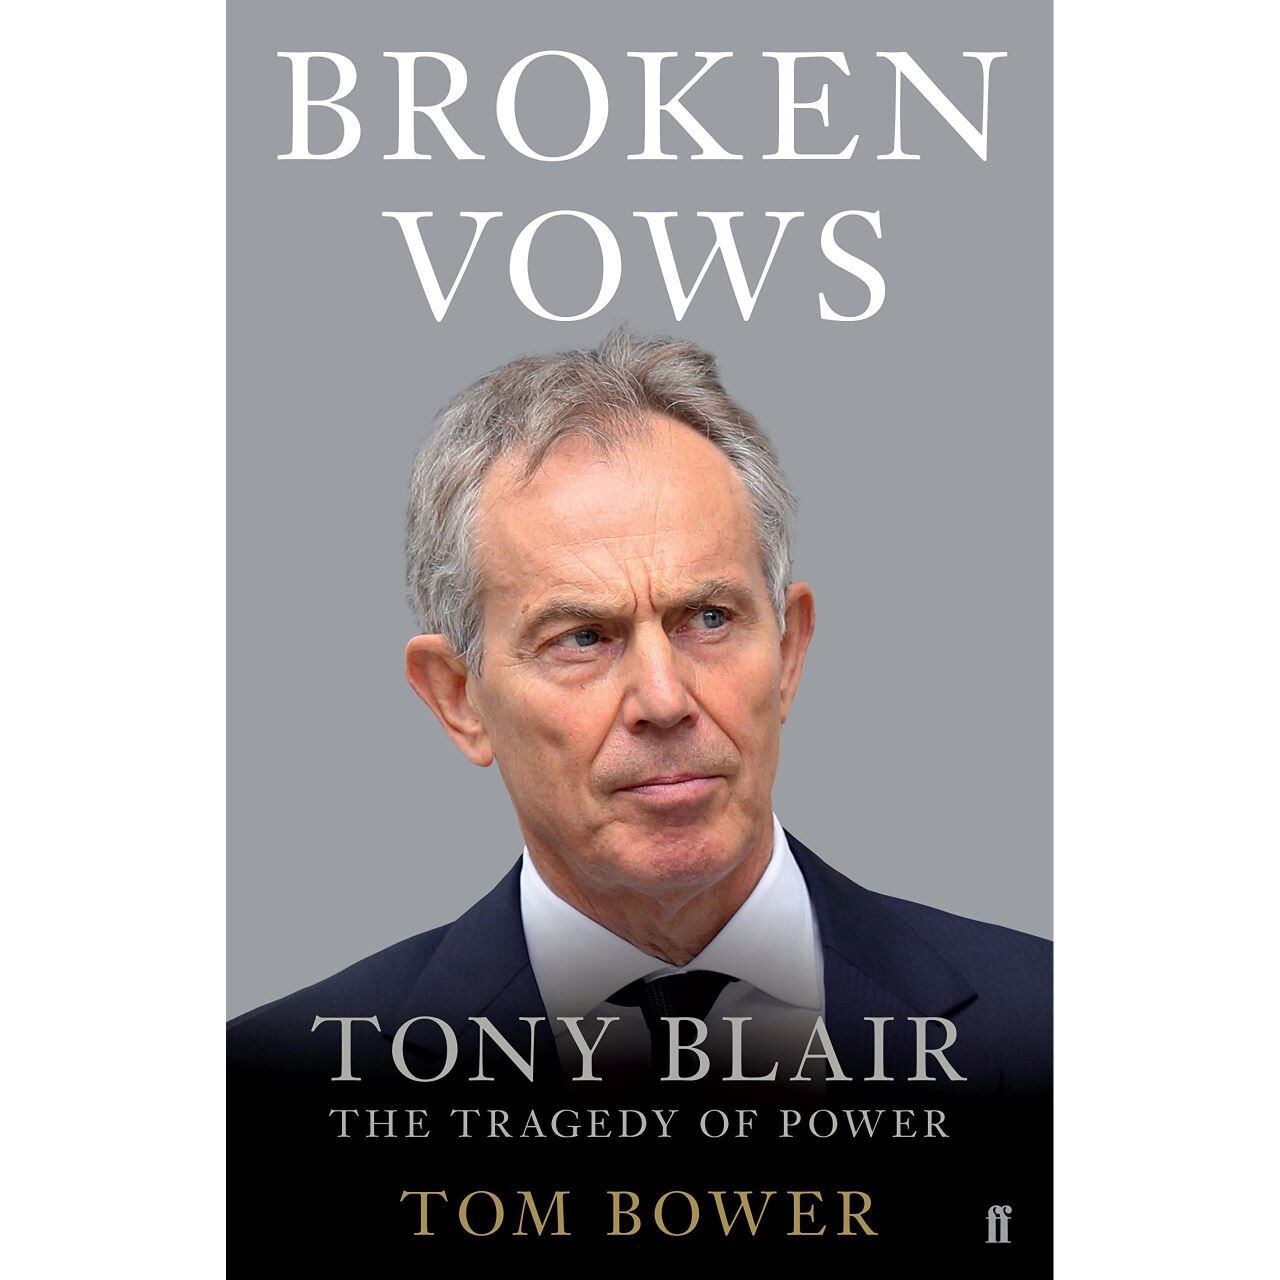 Black Friday SALES Broken Vows: Tony Blair The Tragedy of Power